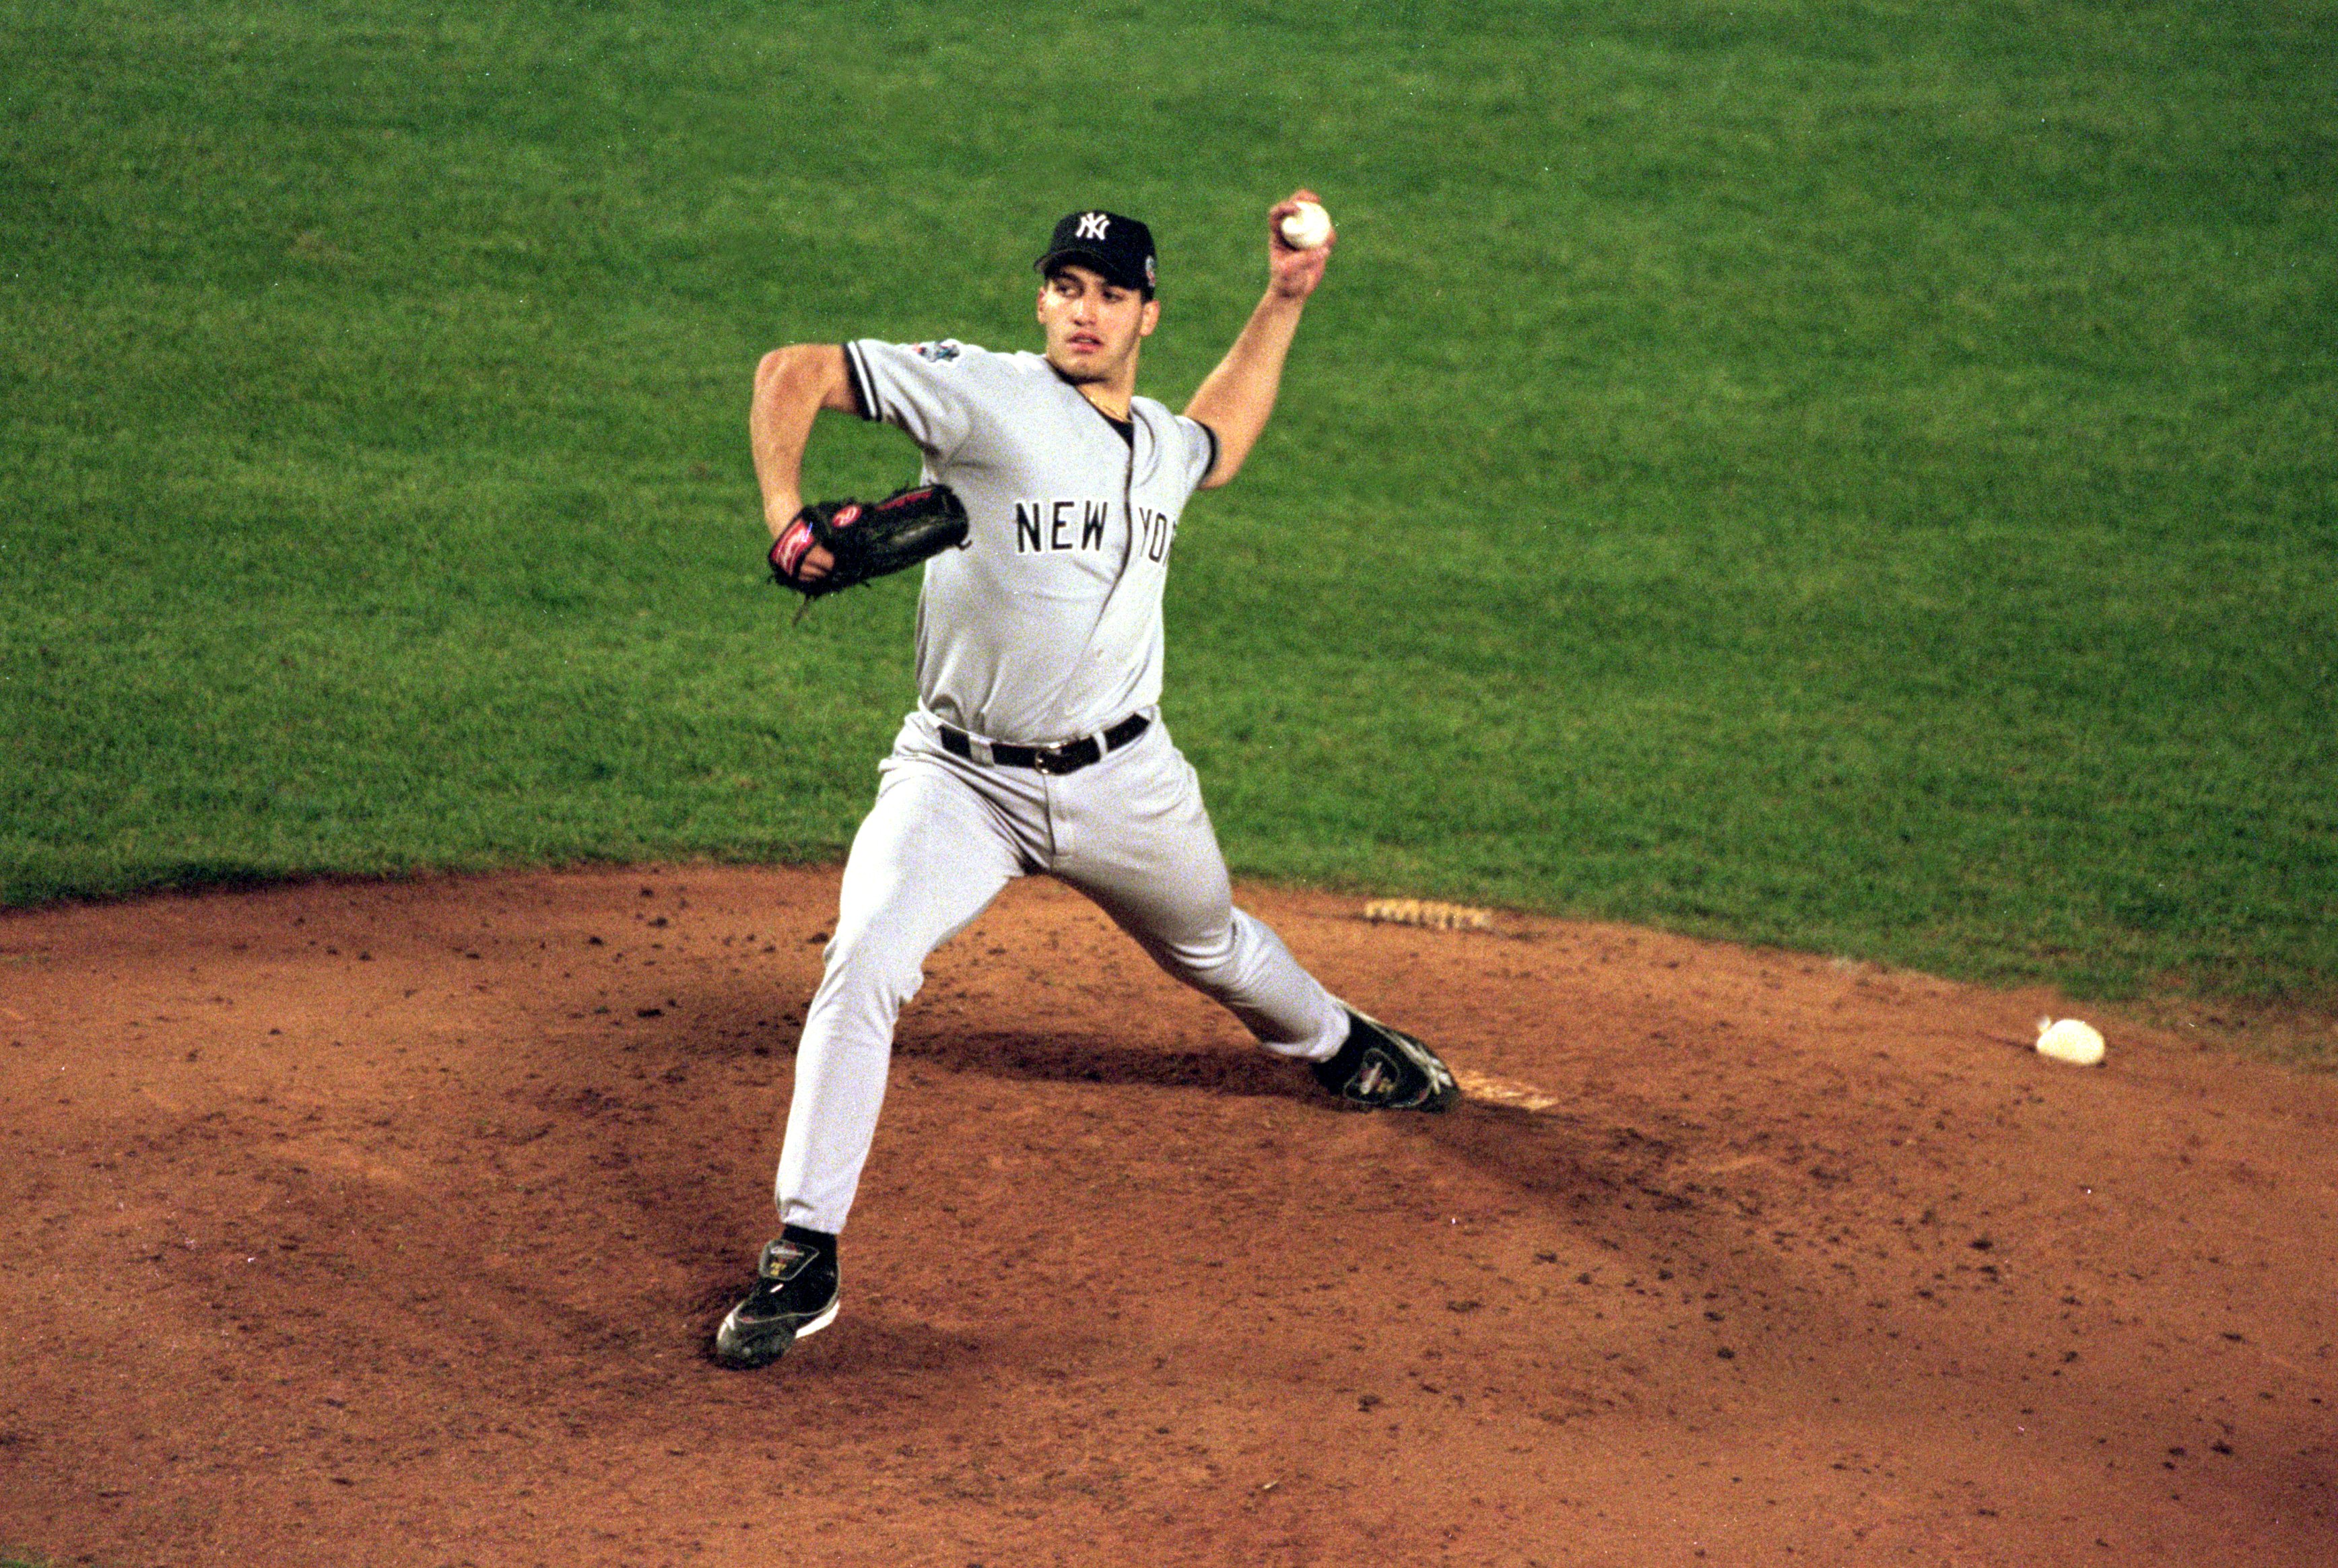 26 Oct 2000:  Andy Pettitte #46 of the New York Yankees winds up and throws a pitch during Game 5 of the 2000 World Series against the New York Mets at Shea Stadium in New York, New York.  The Yankees defeated the Mets 4-2.Mandatory Credit: Al Bello  /All